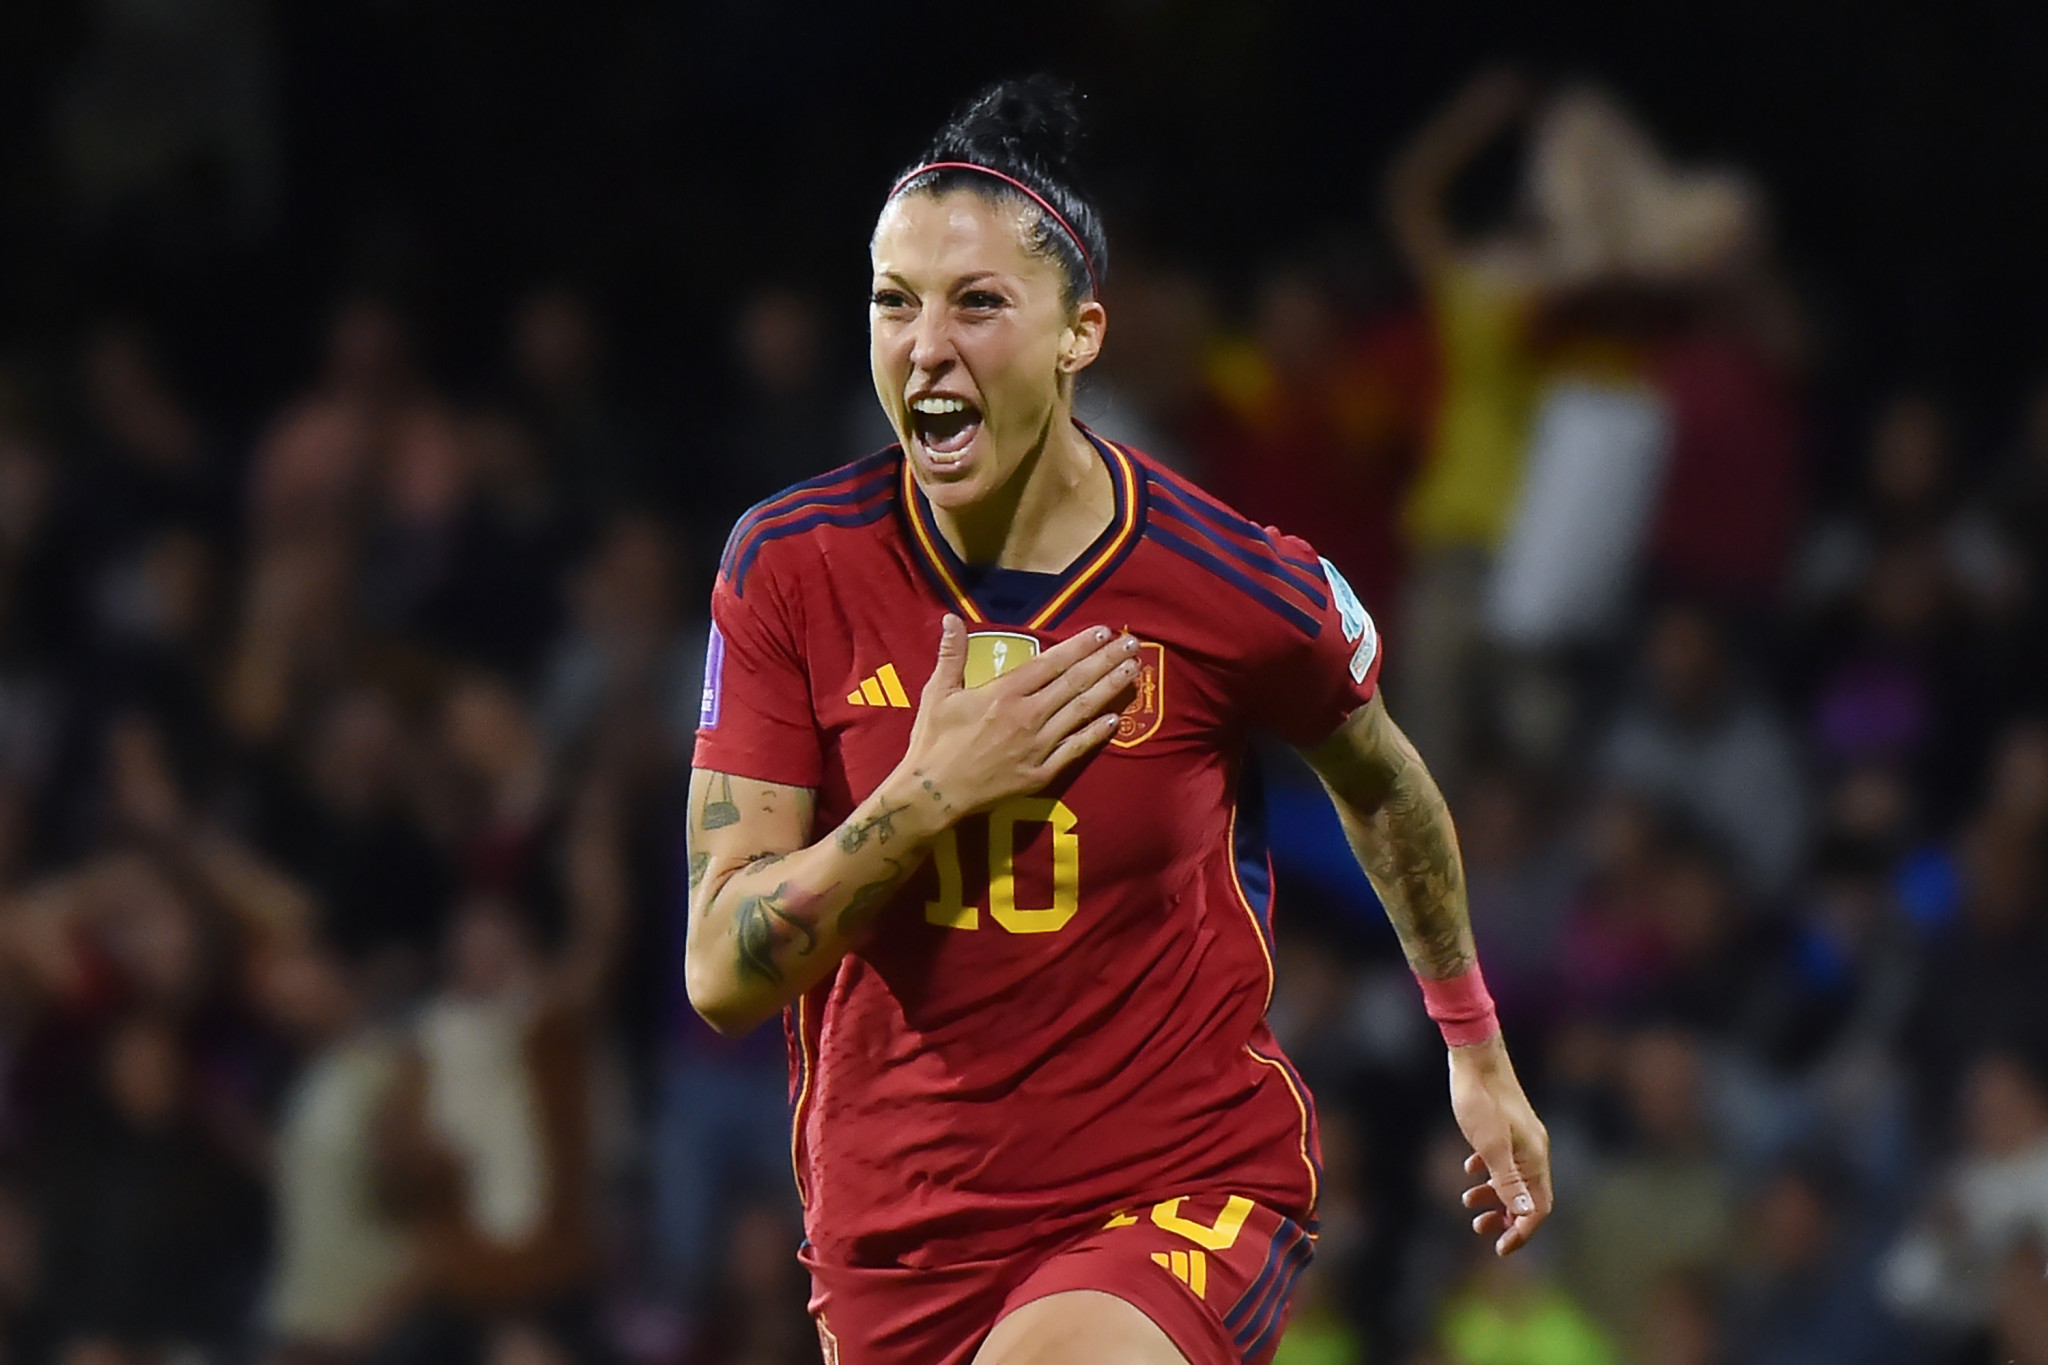 Spain's women's national team's all-time record goalscorer Jenni Hermoso lodged a complaint over the alleged non-consensual kiss by Luis Rubiales ©Getty Images